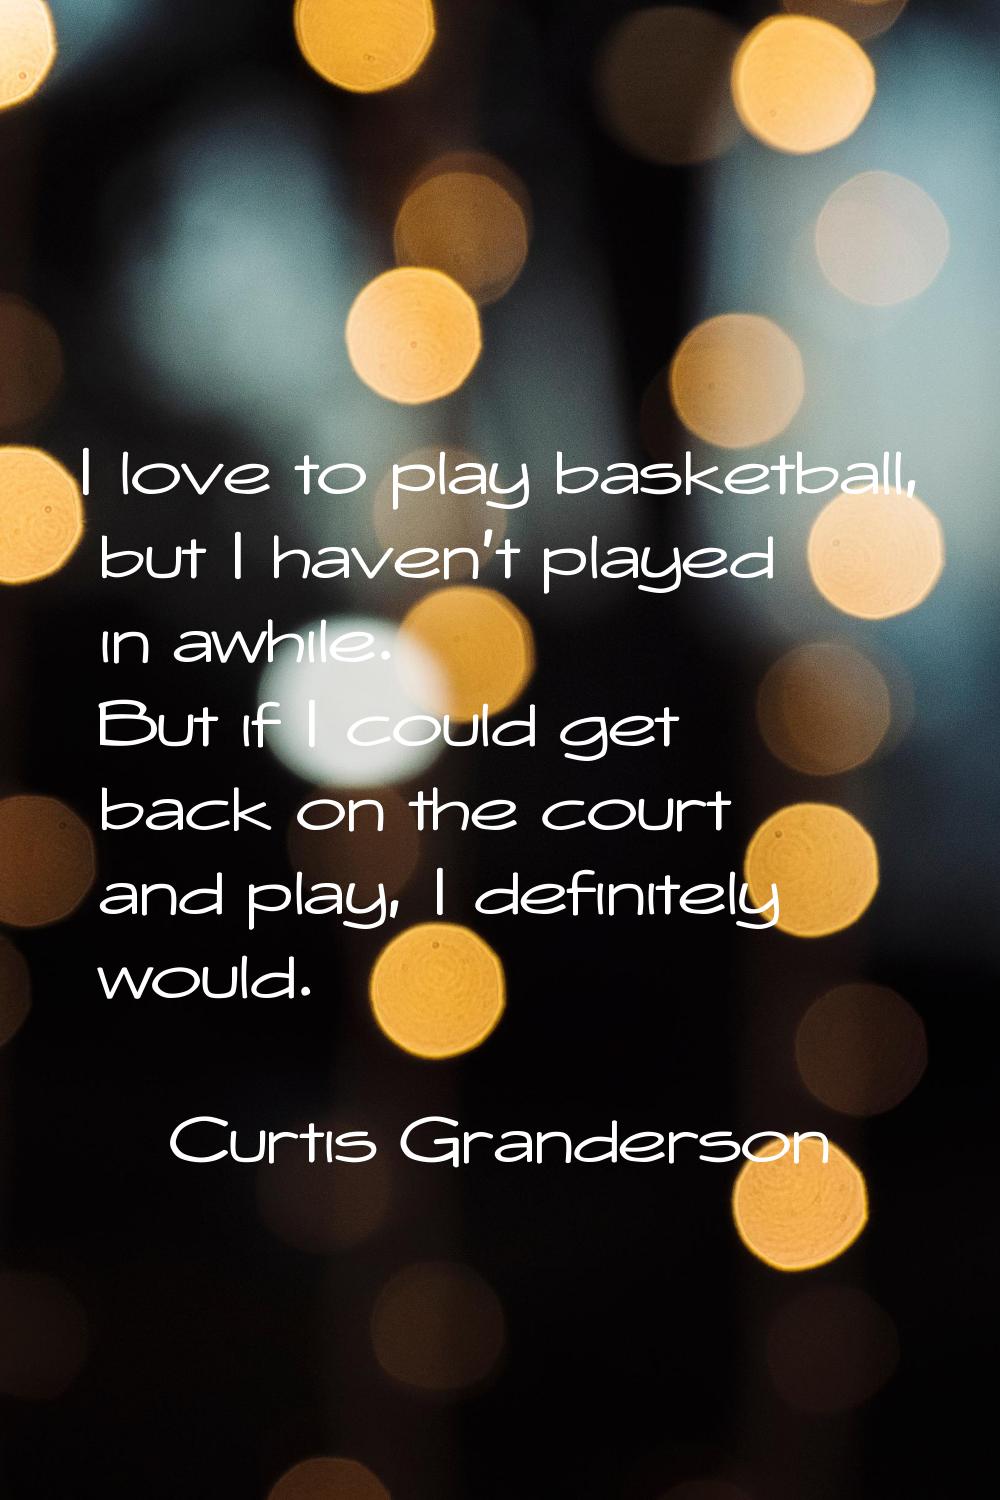 I love to play basketball, but I haven't played in awhile. But if I could get back on the court and